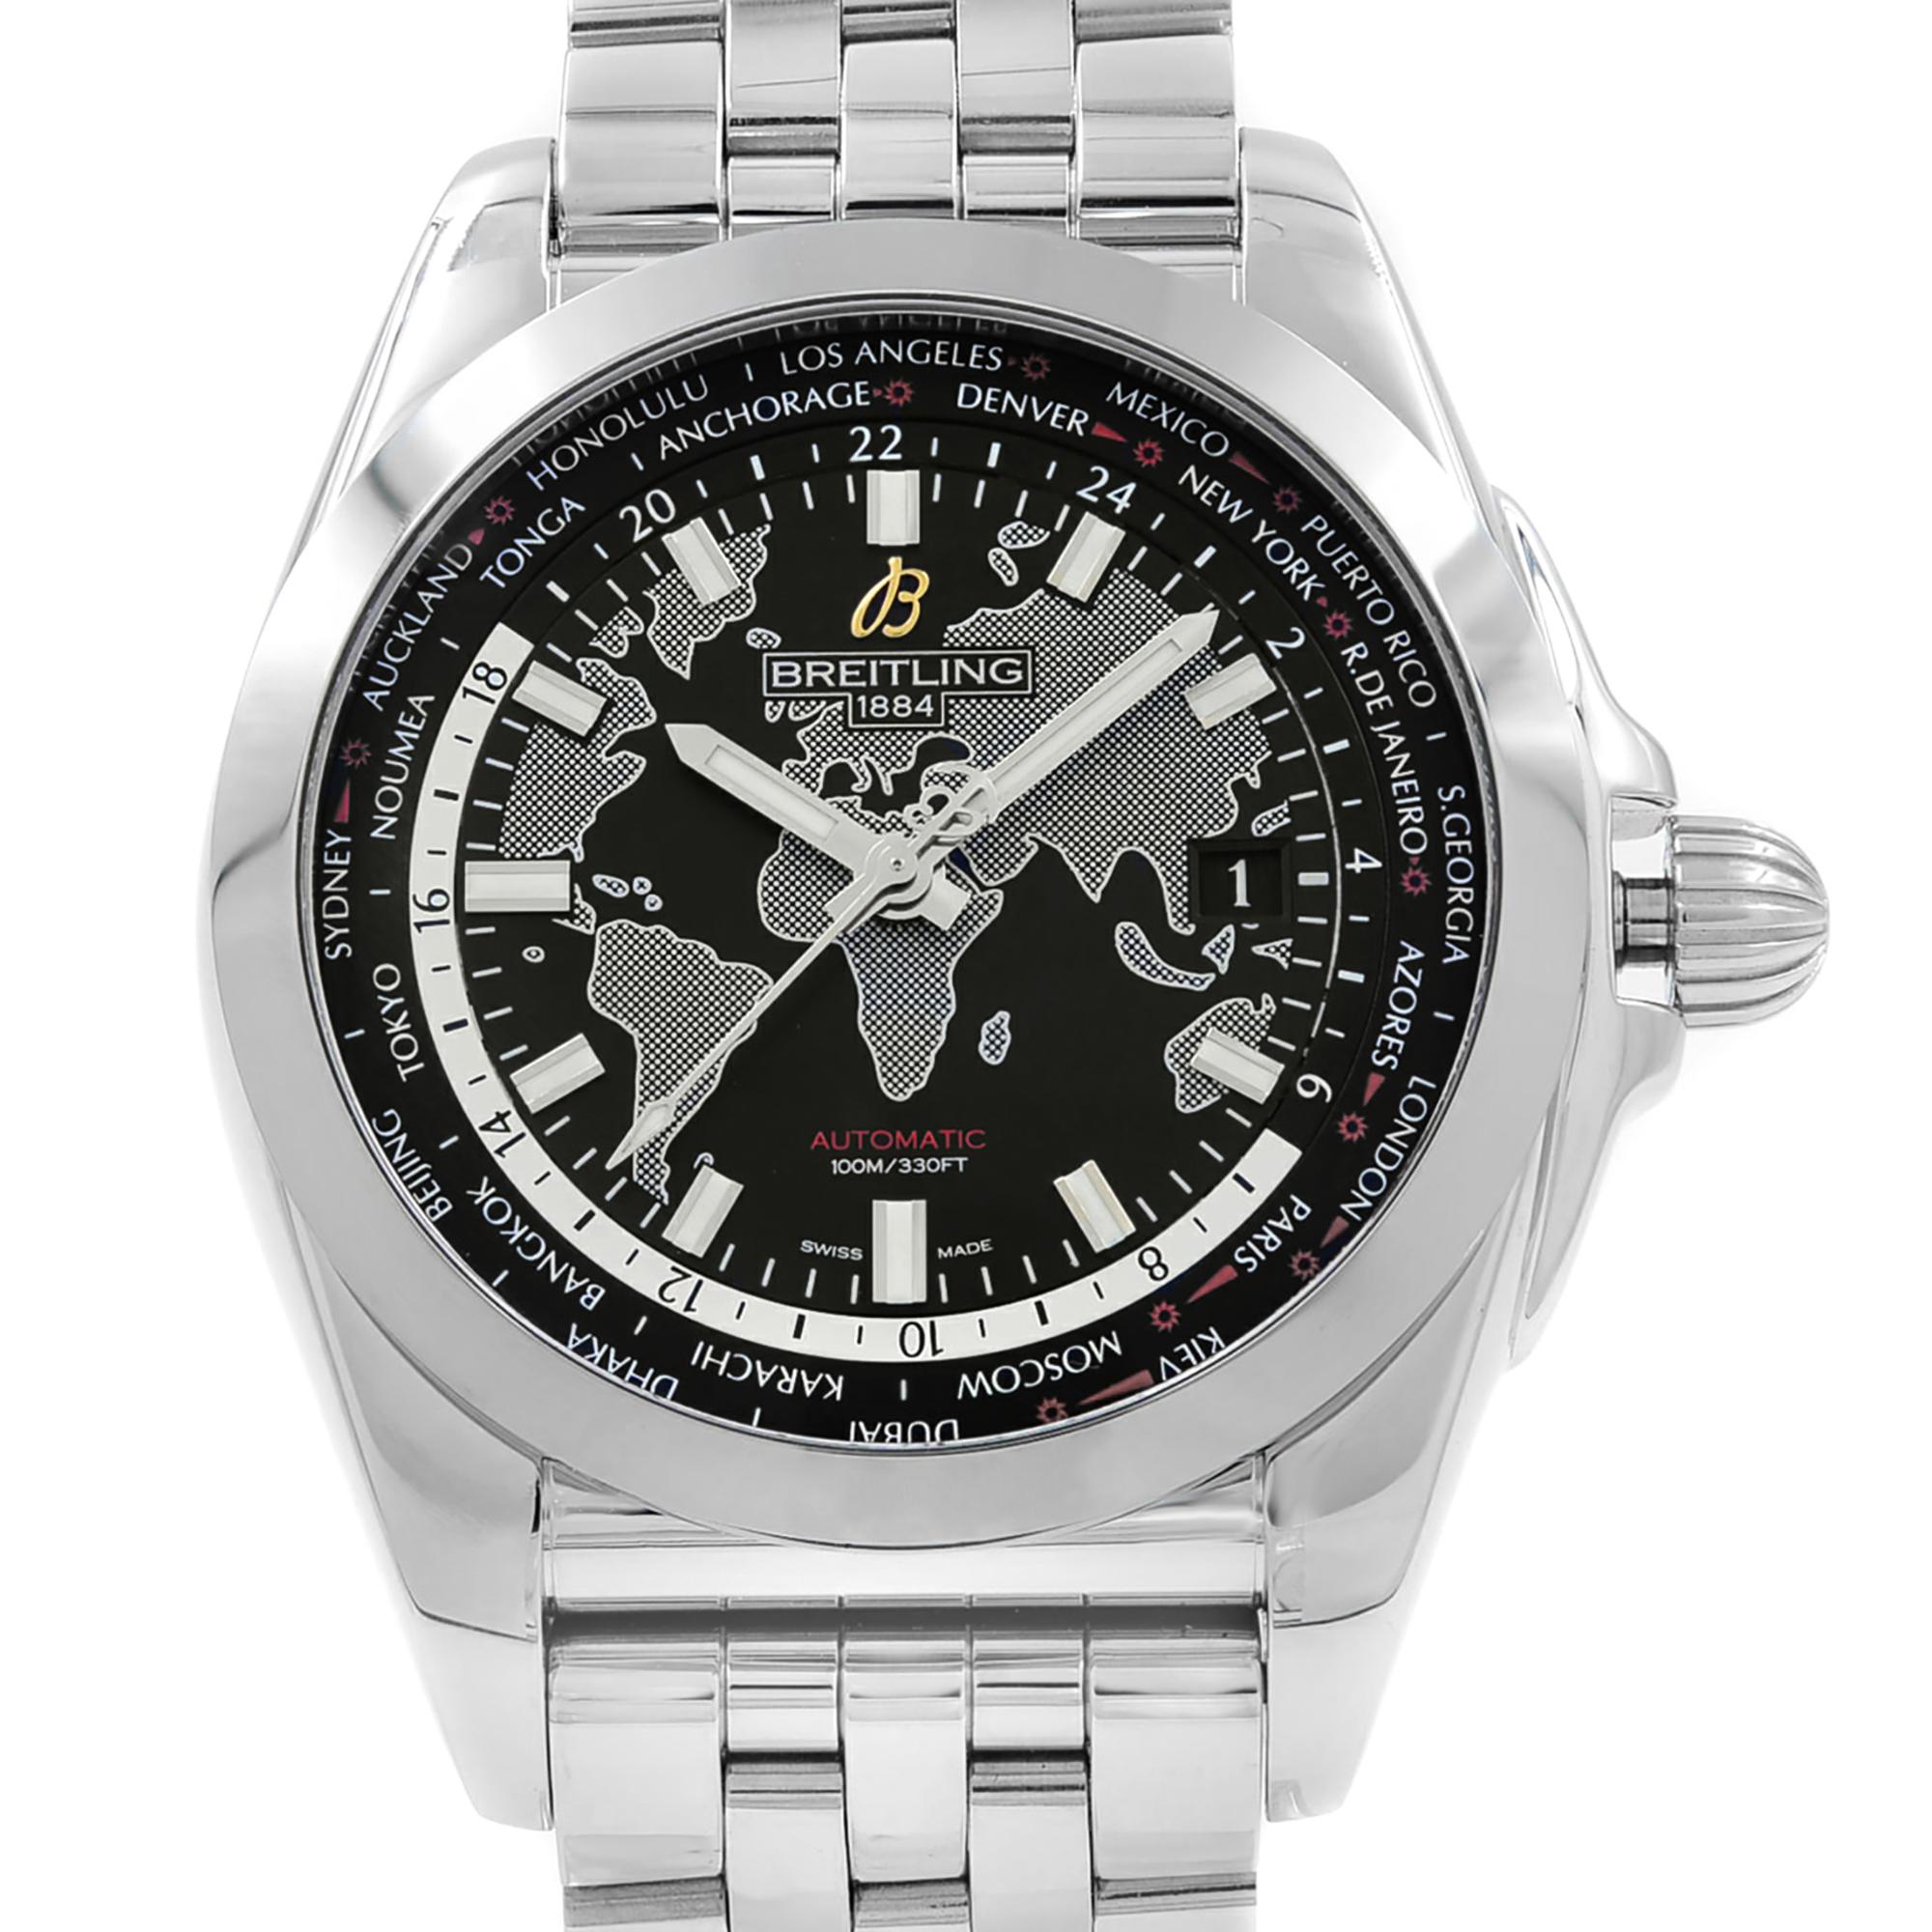 “This display model Breitling Galactic WB3510U4/BD94-375A is a beautiful men's timepiece that is powered by an automatic movement which is cased in a stainless steel case. It has a round shape face, date dial and has hand sticks style markers. It is